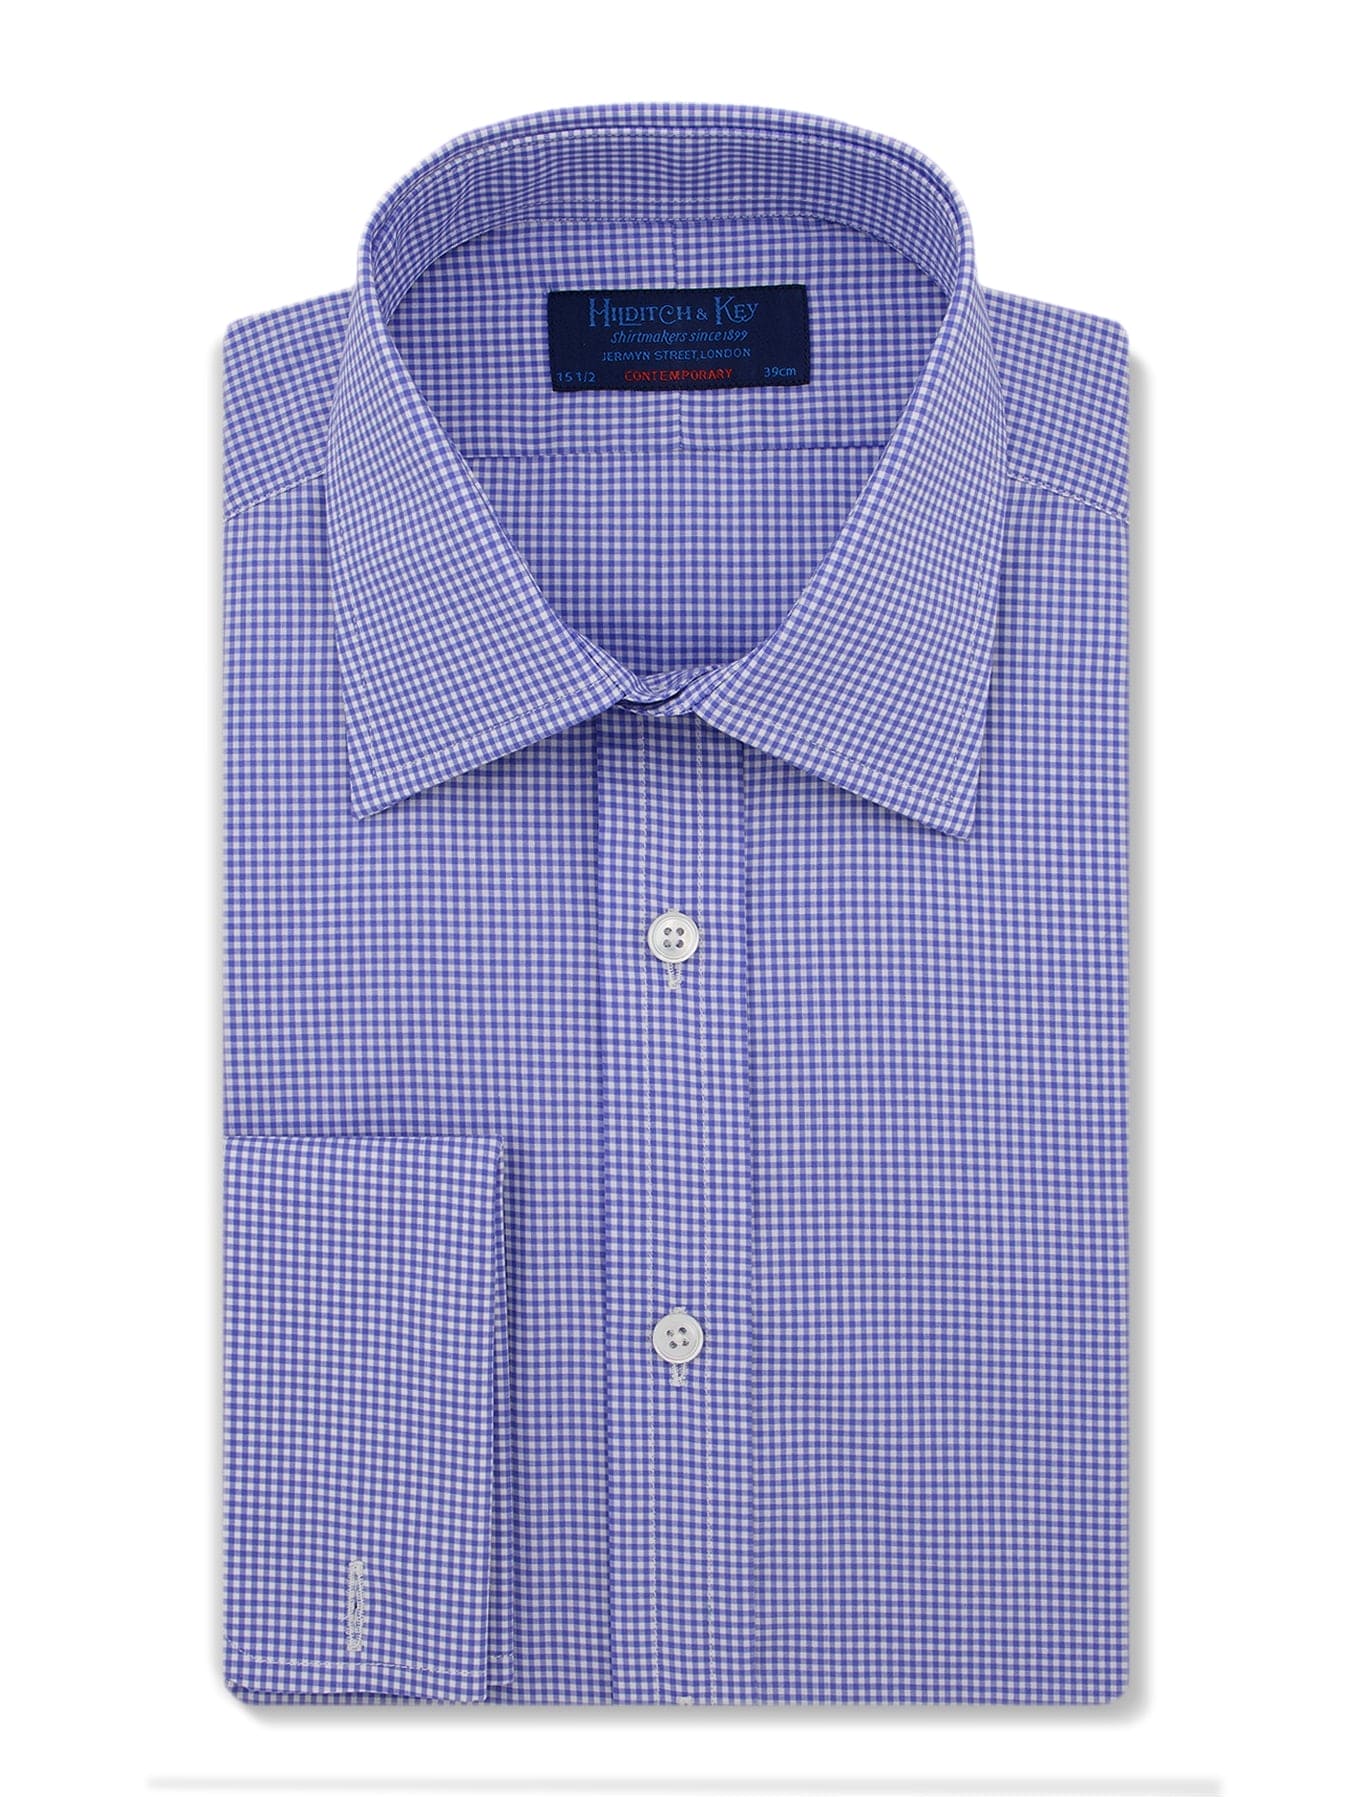 Contemporary Fit, Classic Collar, Double Cuff in Blue Gingham Check